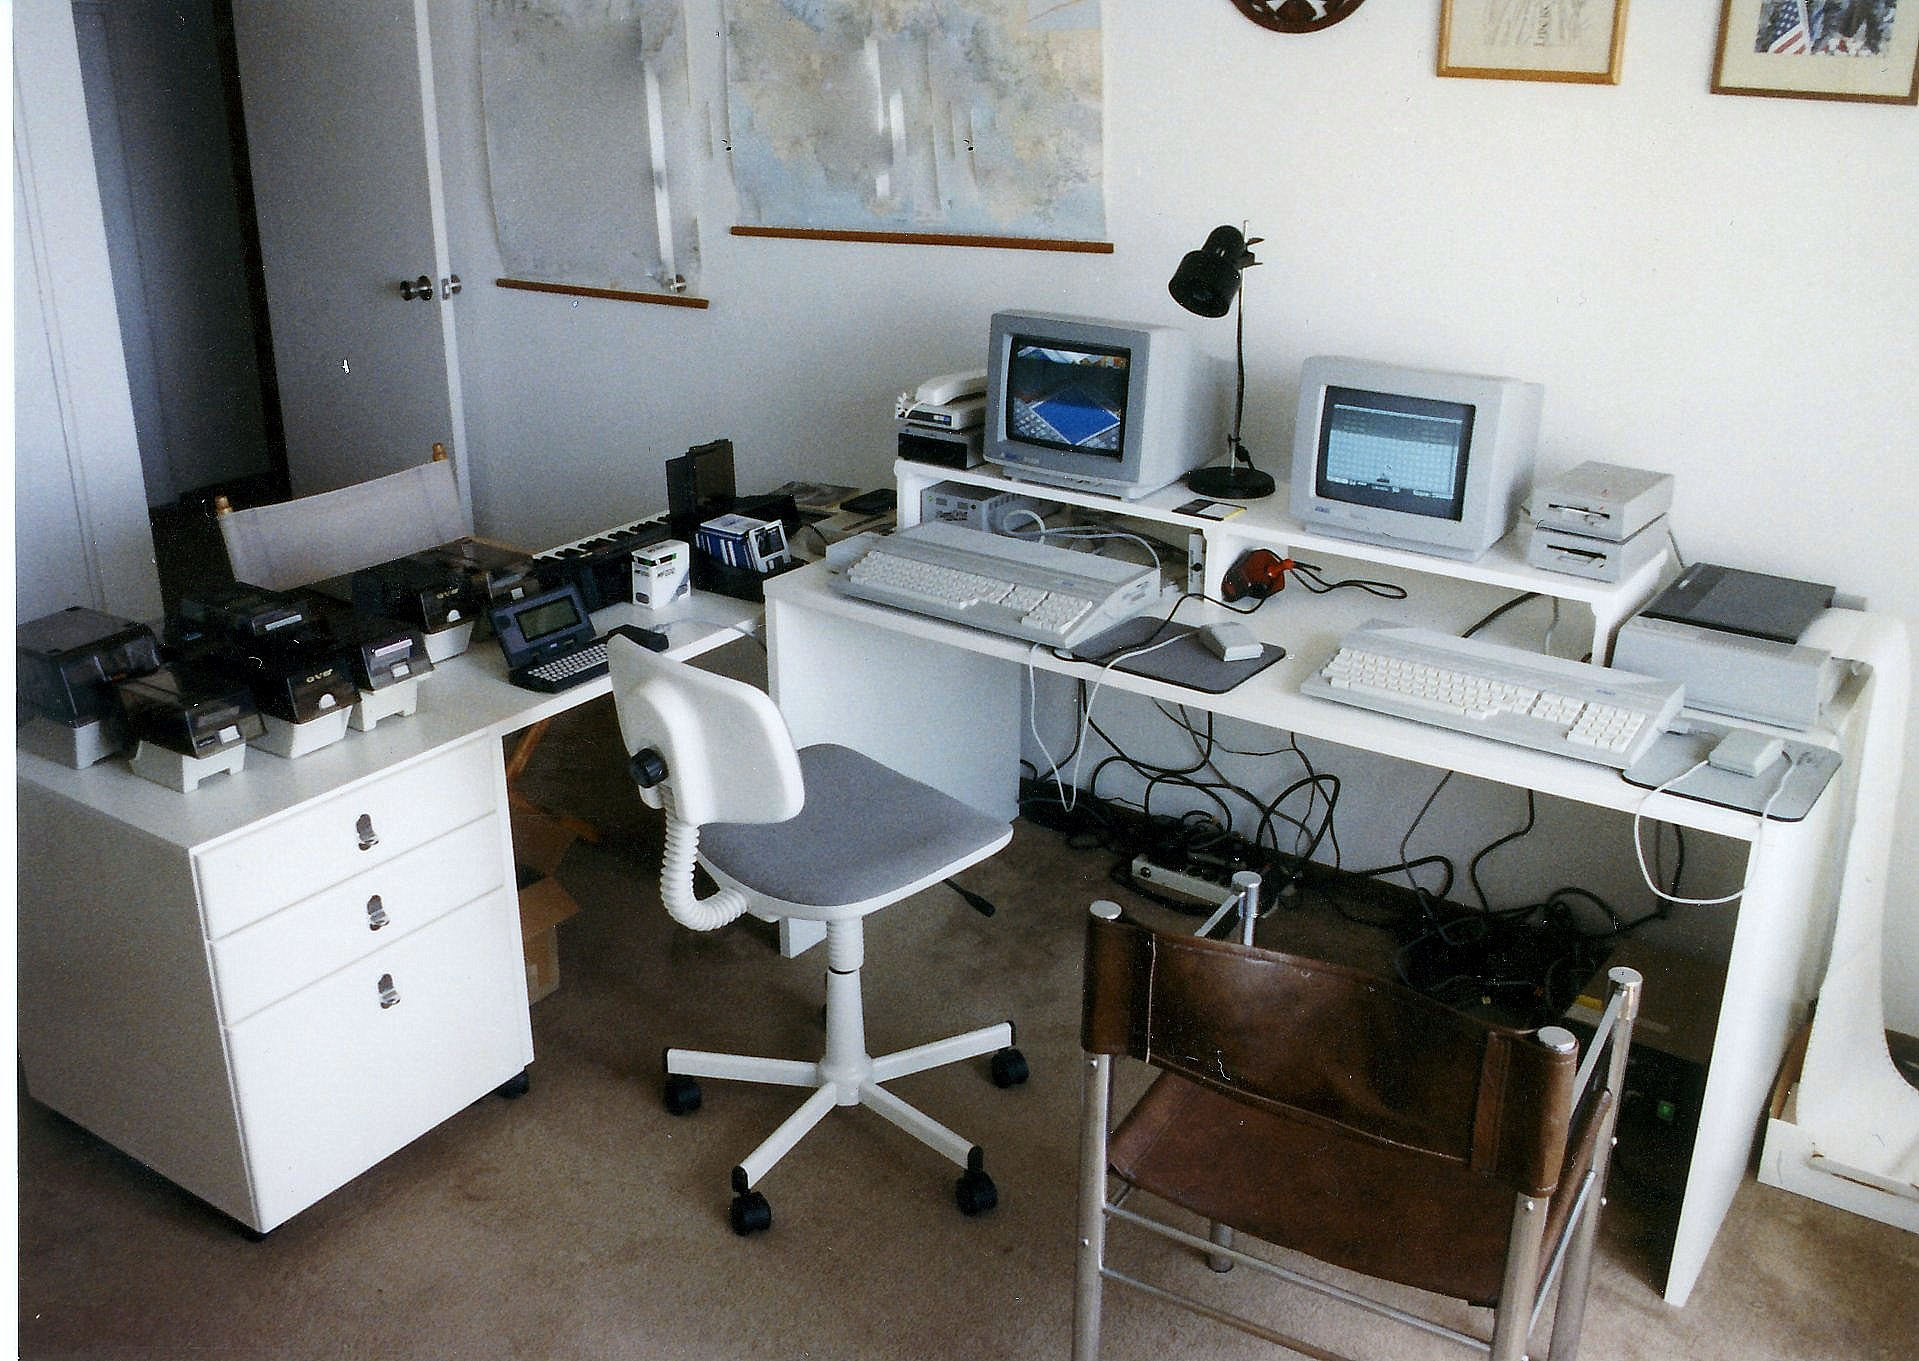 there is an older fashioned office with computers on it